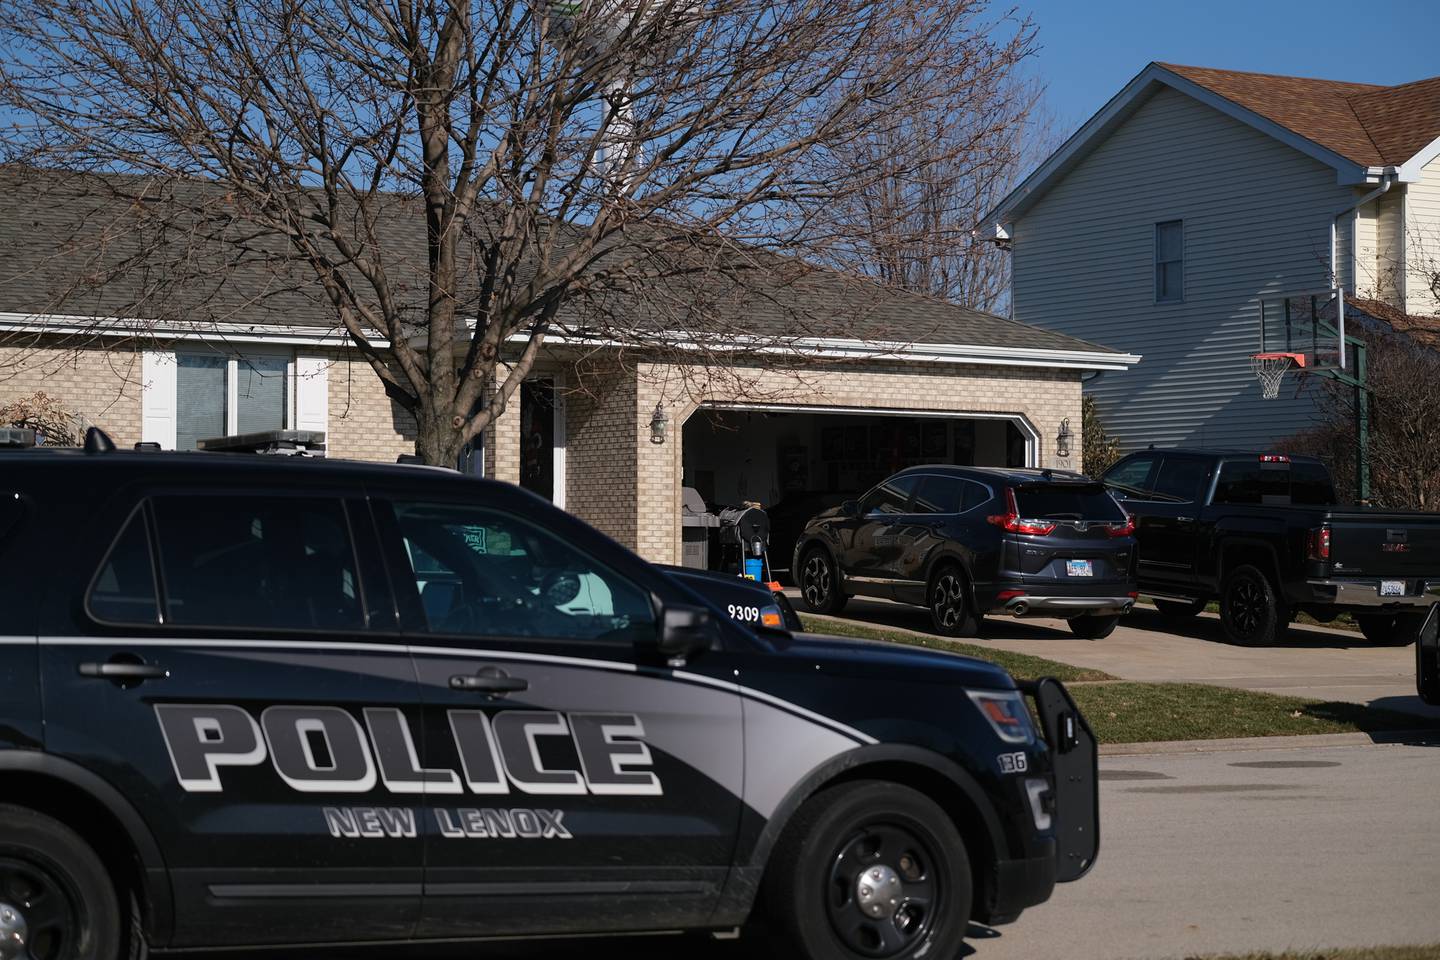 New Lenox police sit in front of the home at the 1900 block of Grand Prairie Driver. A 21-year old man shot his father at the home on Grand Prairie Drive in New Lenox early Monday morning. Monday, Dec. 20, 2021 in New Lenox.